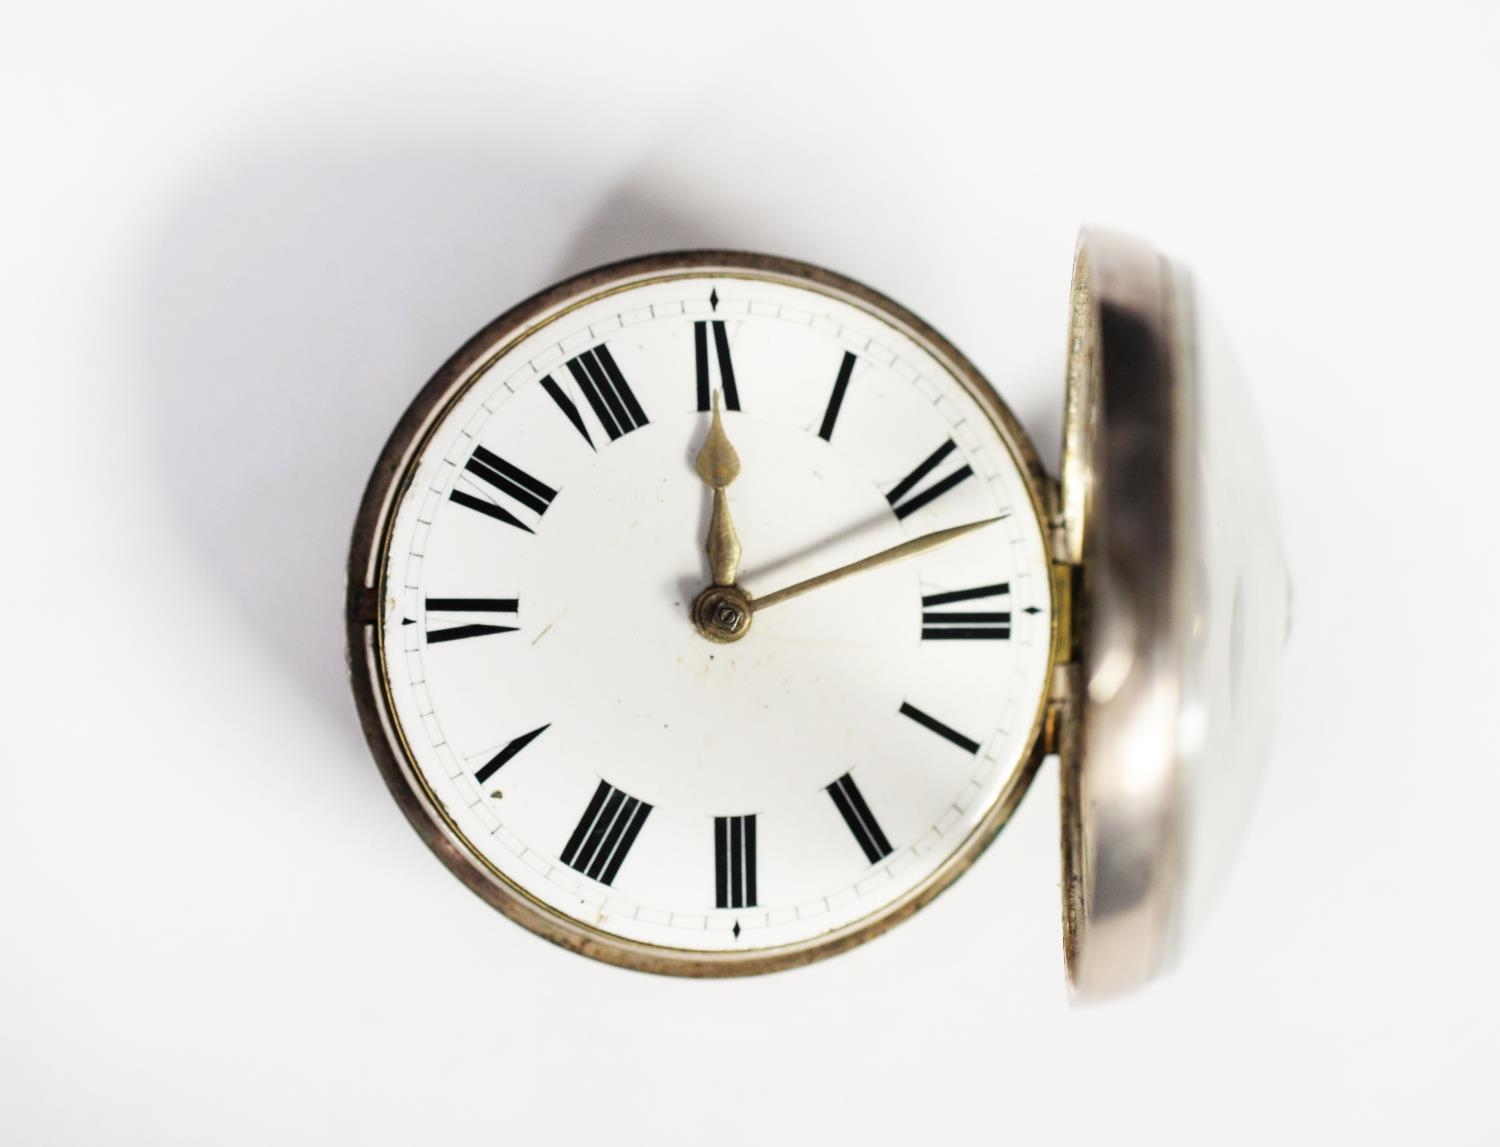 J. CETTI & CO., LONDON, GEORGE IV SILVER VERG POCKET WATCH No 6285, with white enamelled roman dial,